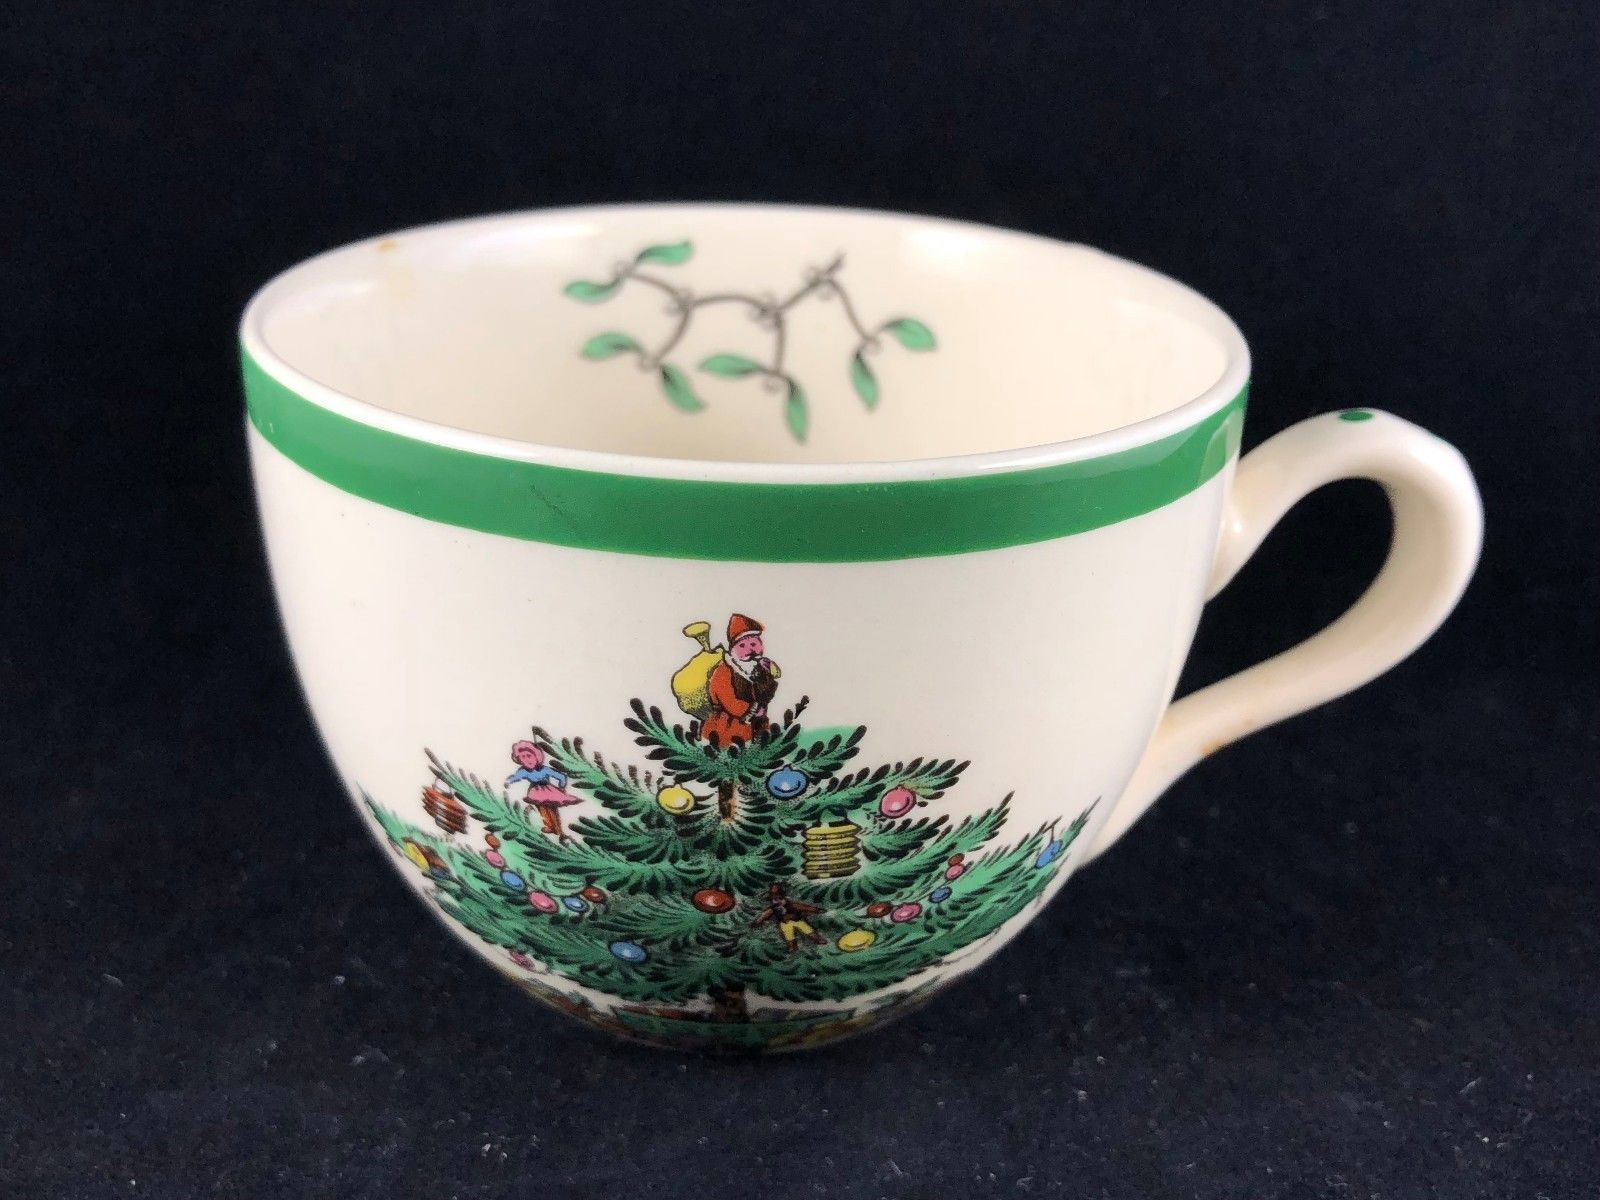 Spode Christmas Tree Teacup S3324 M 28-M - Made in England - $9.50